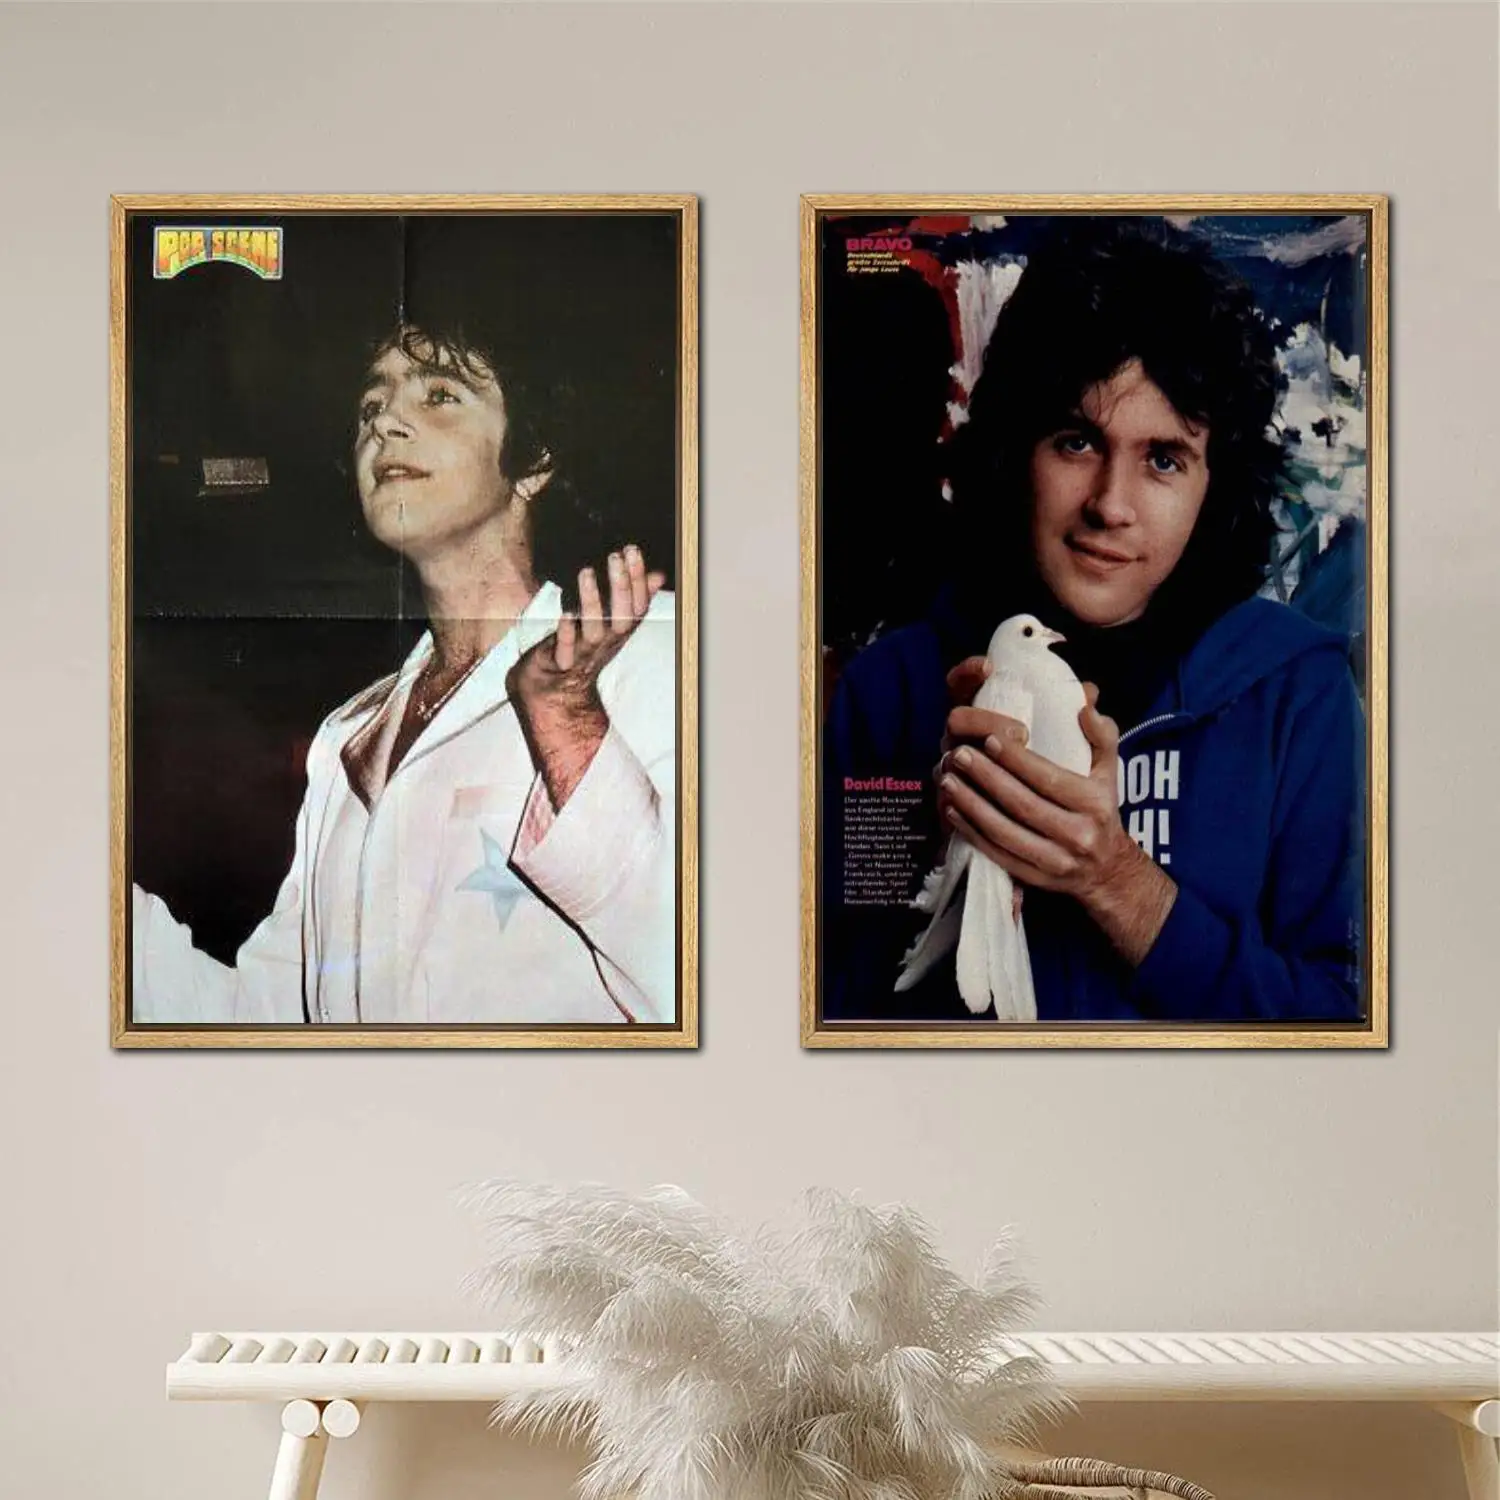 David Essex Poster Painting 24x36 Wall Art Canvas Posters room decor Modern Family bedroom Decoration Art wall decor